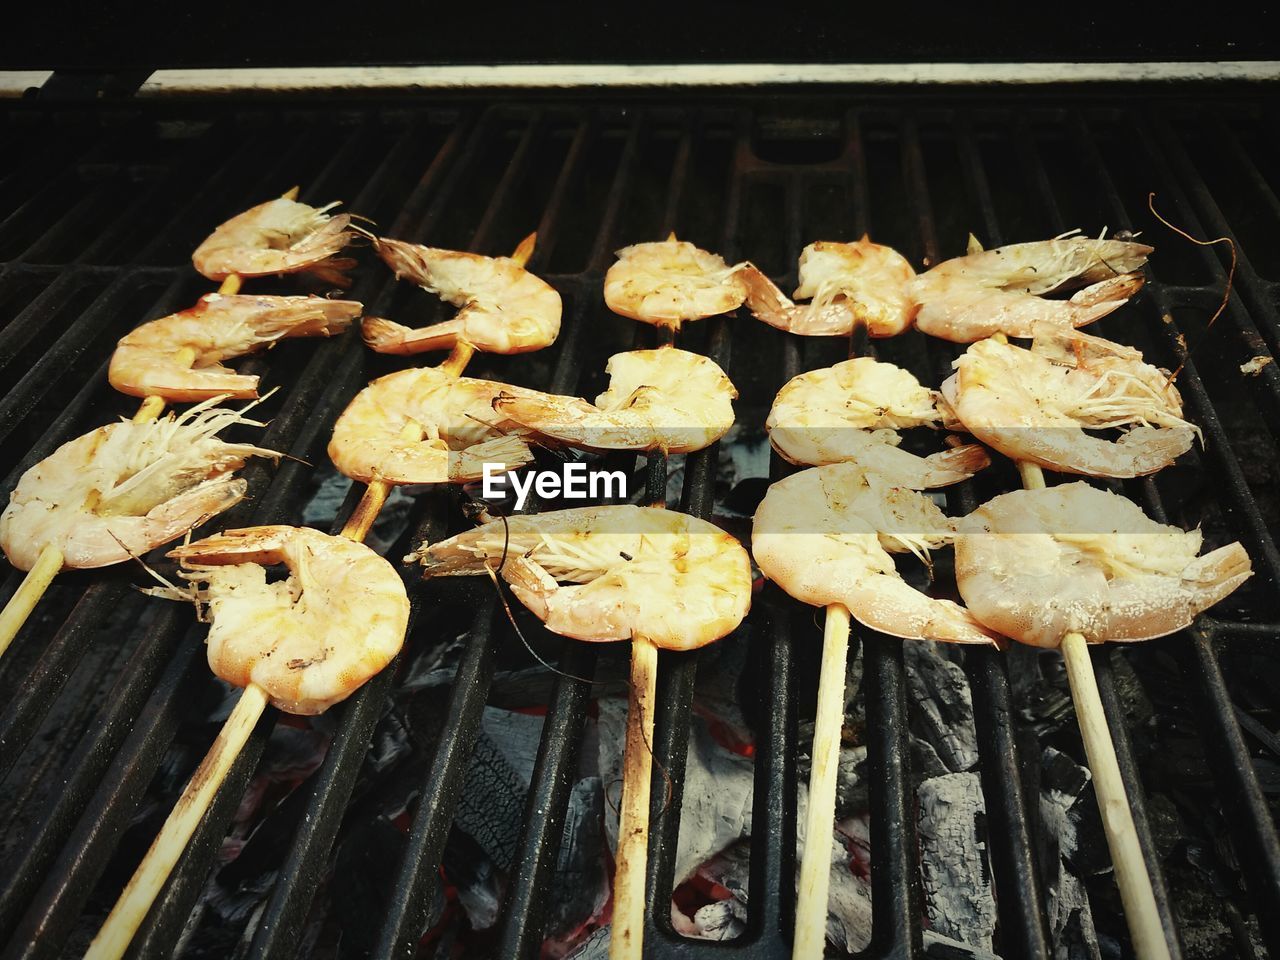 Prawns on barbecue grill